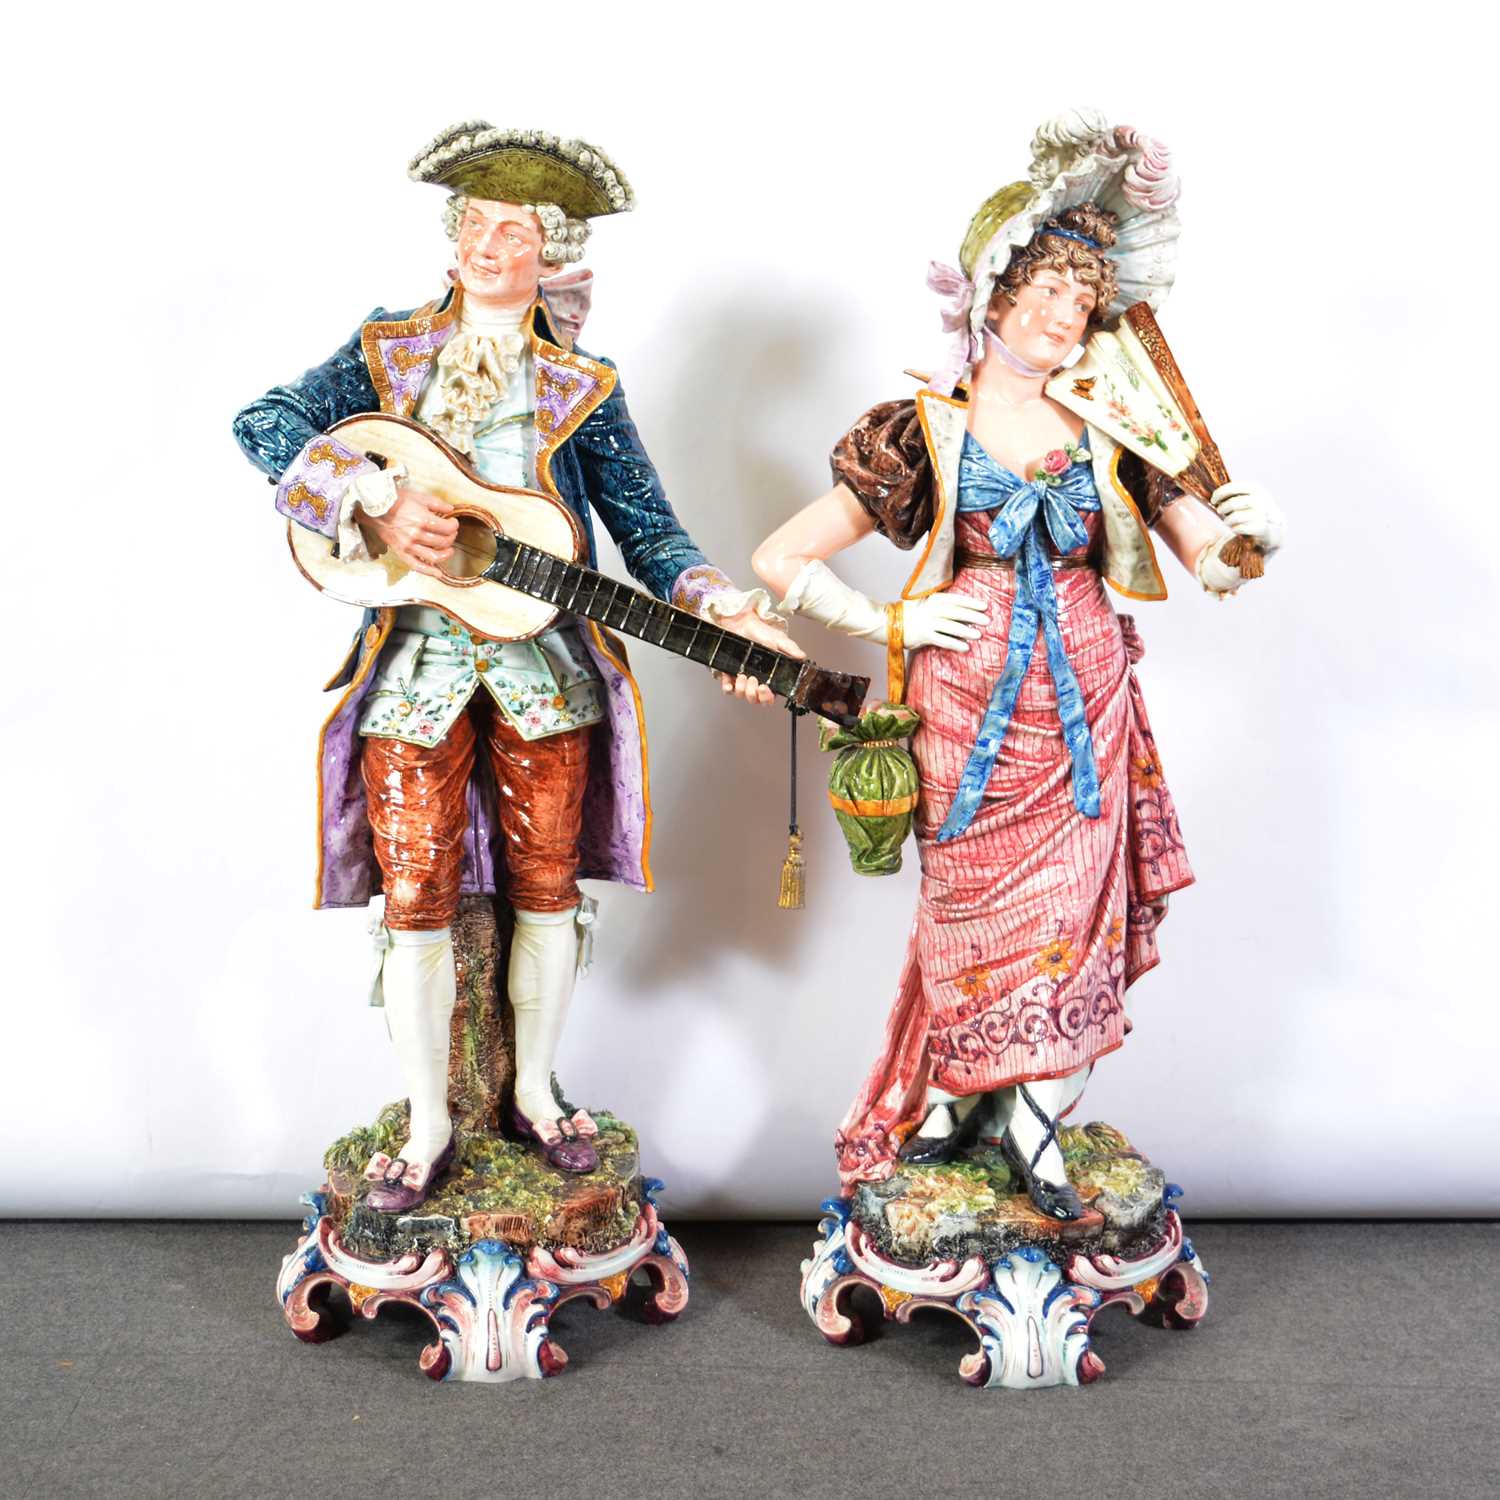 Lot 11 - Large pair of Continental pottery figures, late 19th century